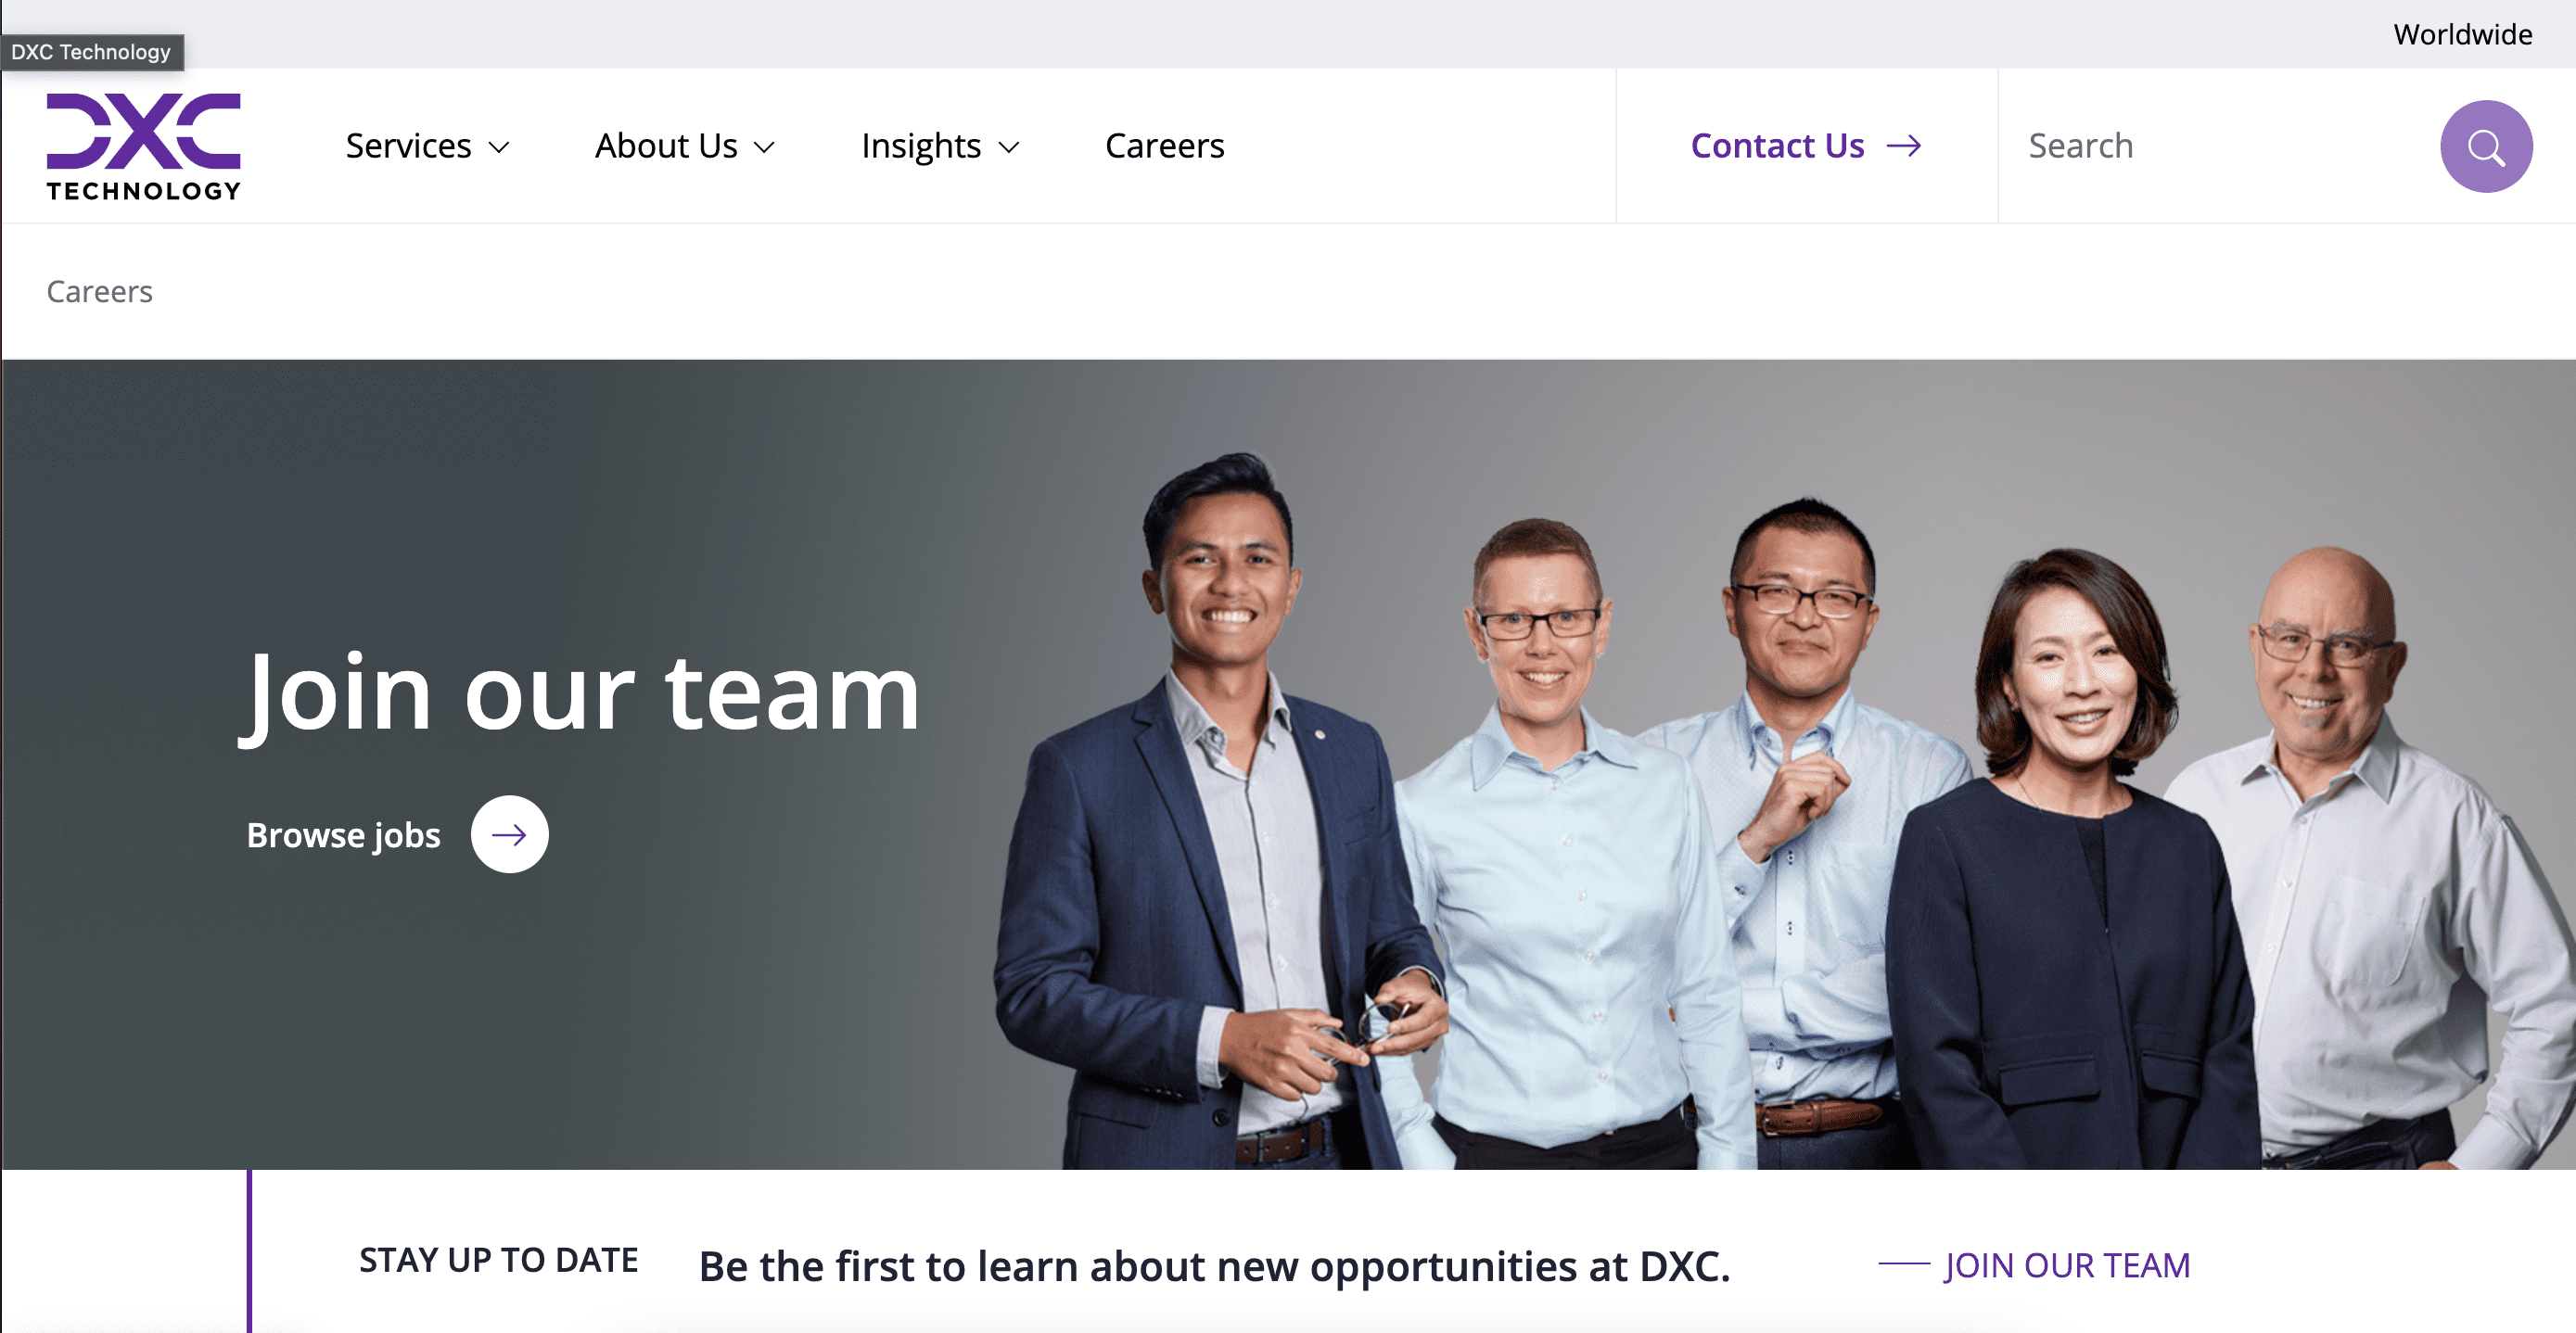 DXC Technology Careers landing page